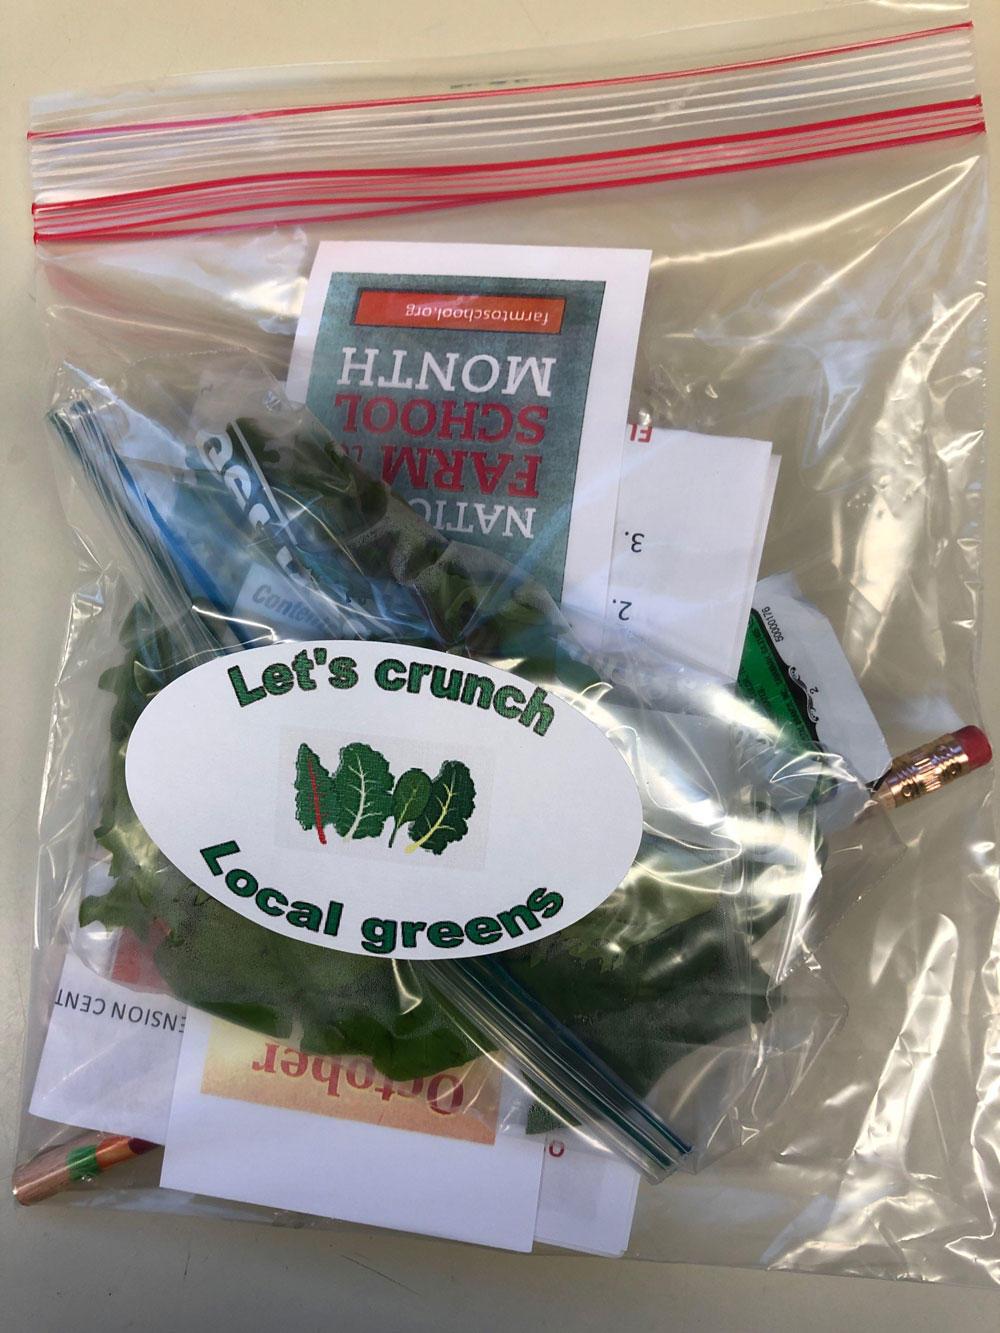 The Klamath County Farm to School and School Garden team created take-home bags for youths for its annual "Crunch at Onc